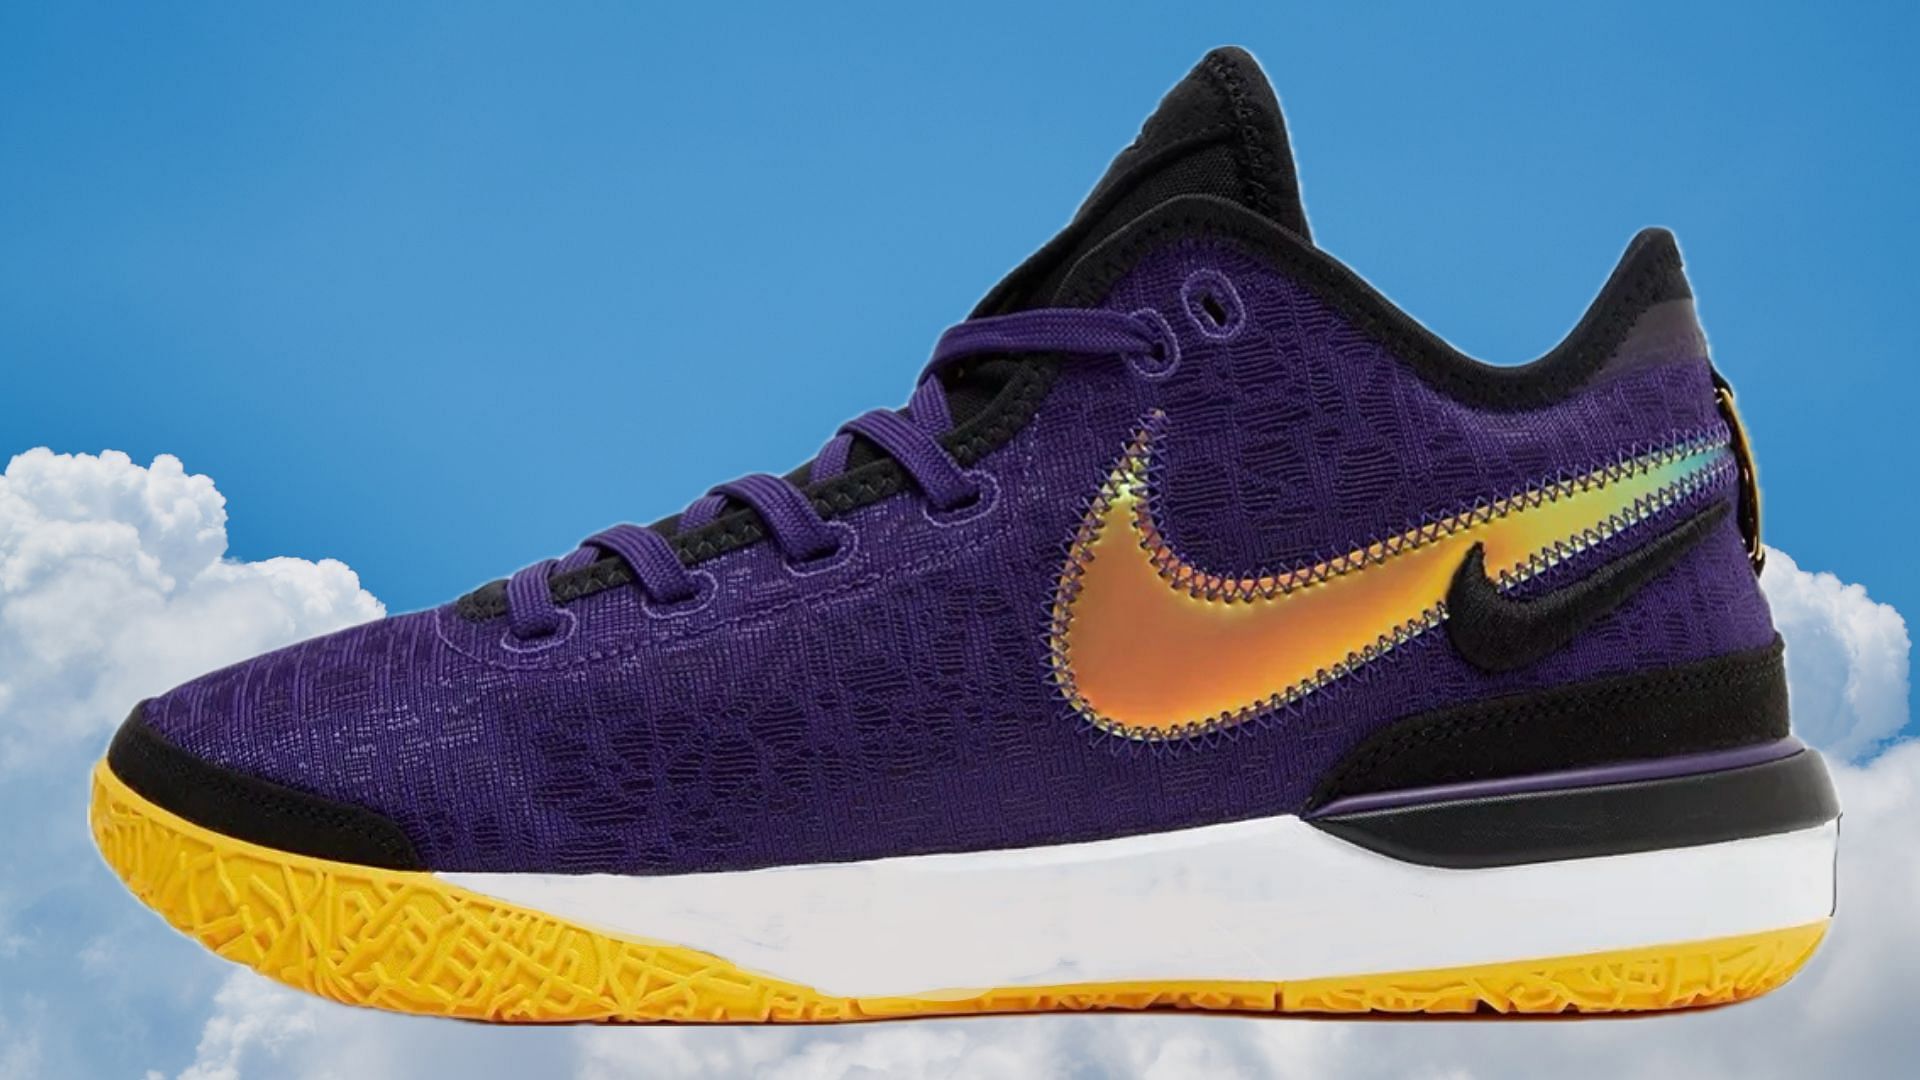 LeBron James: Nike LeBron NXXT Gen “Lakers” shoes: Everything we know so far